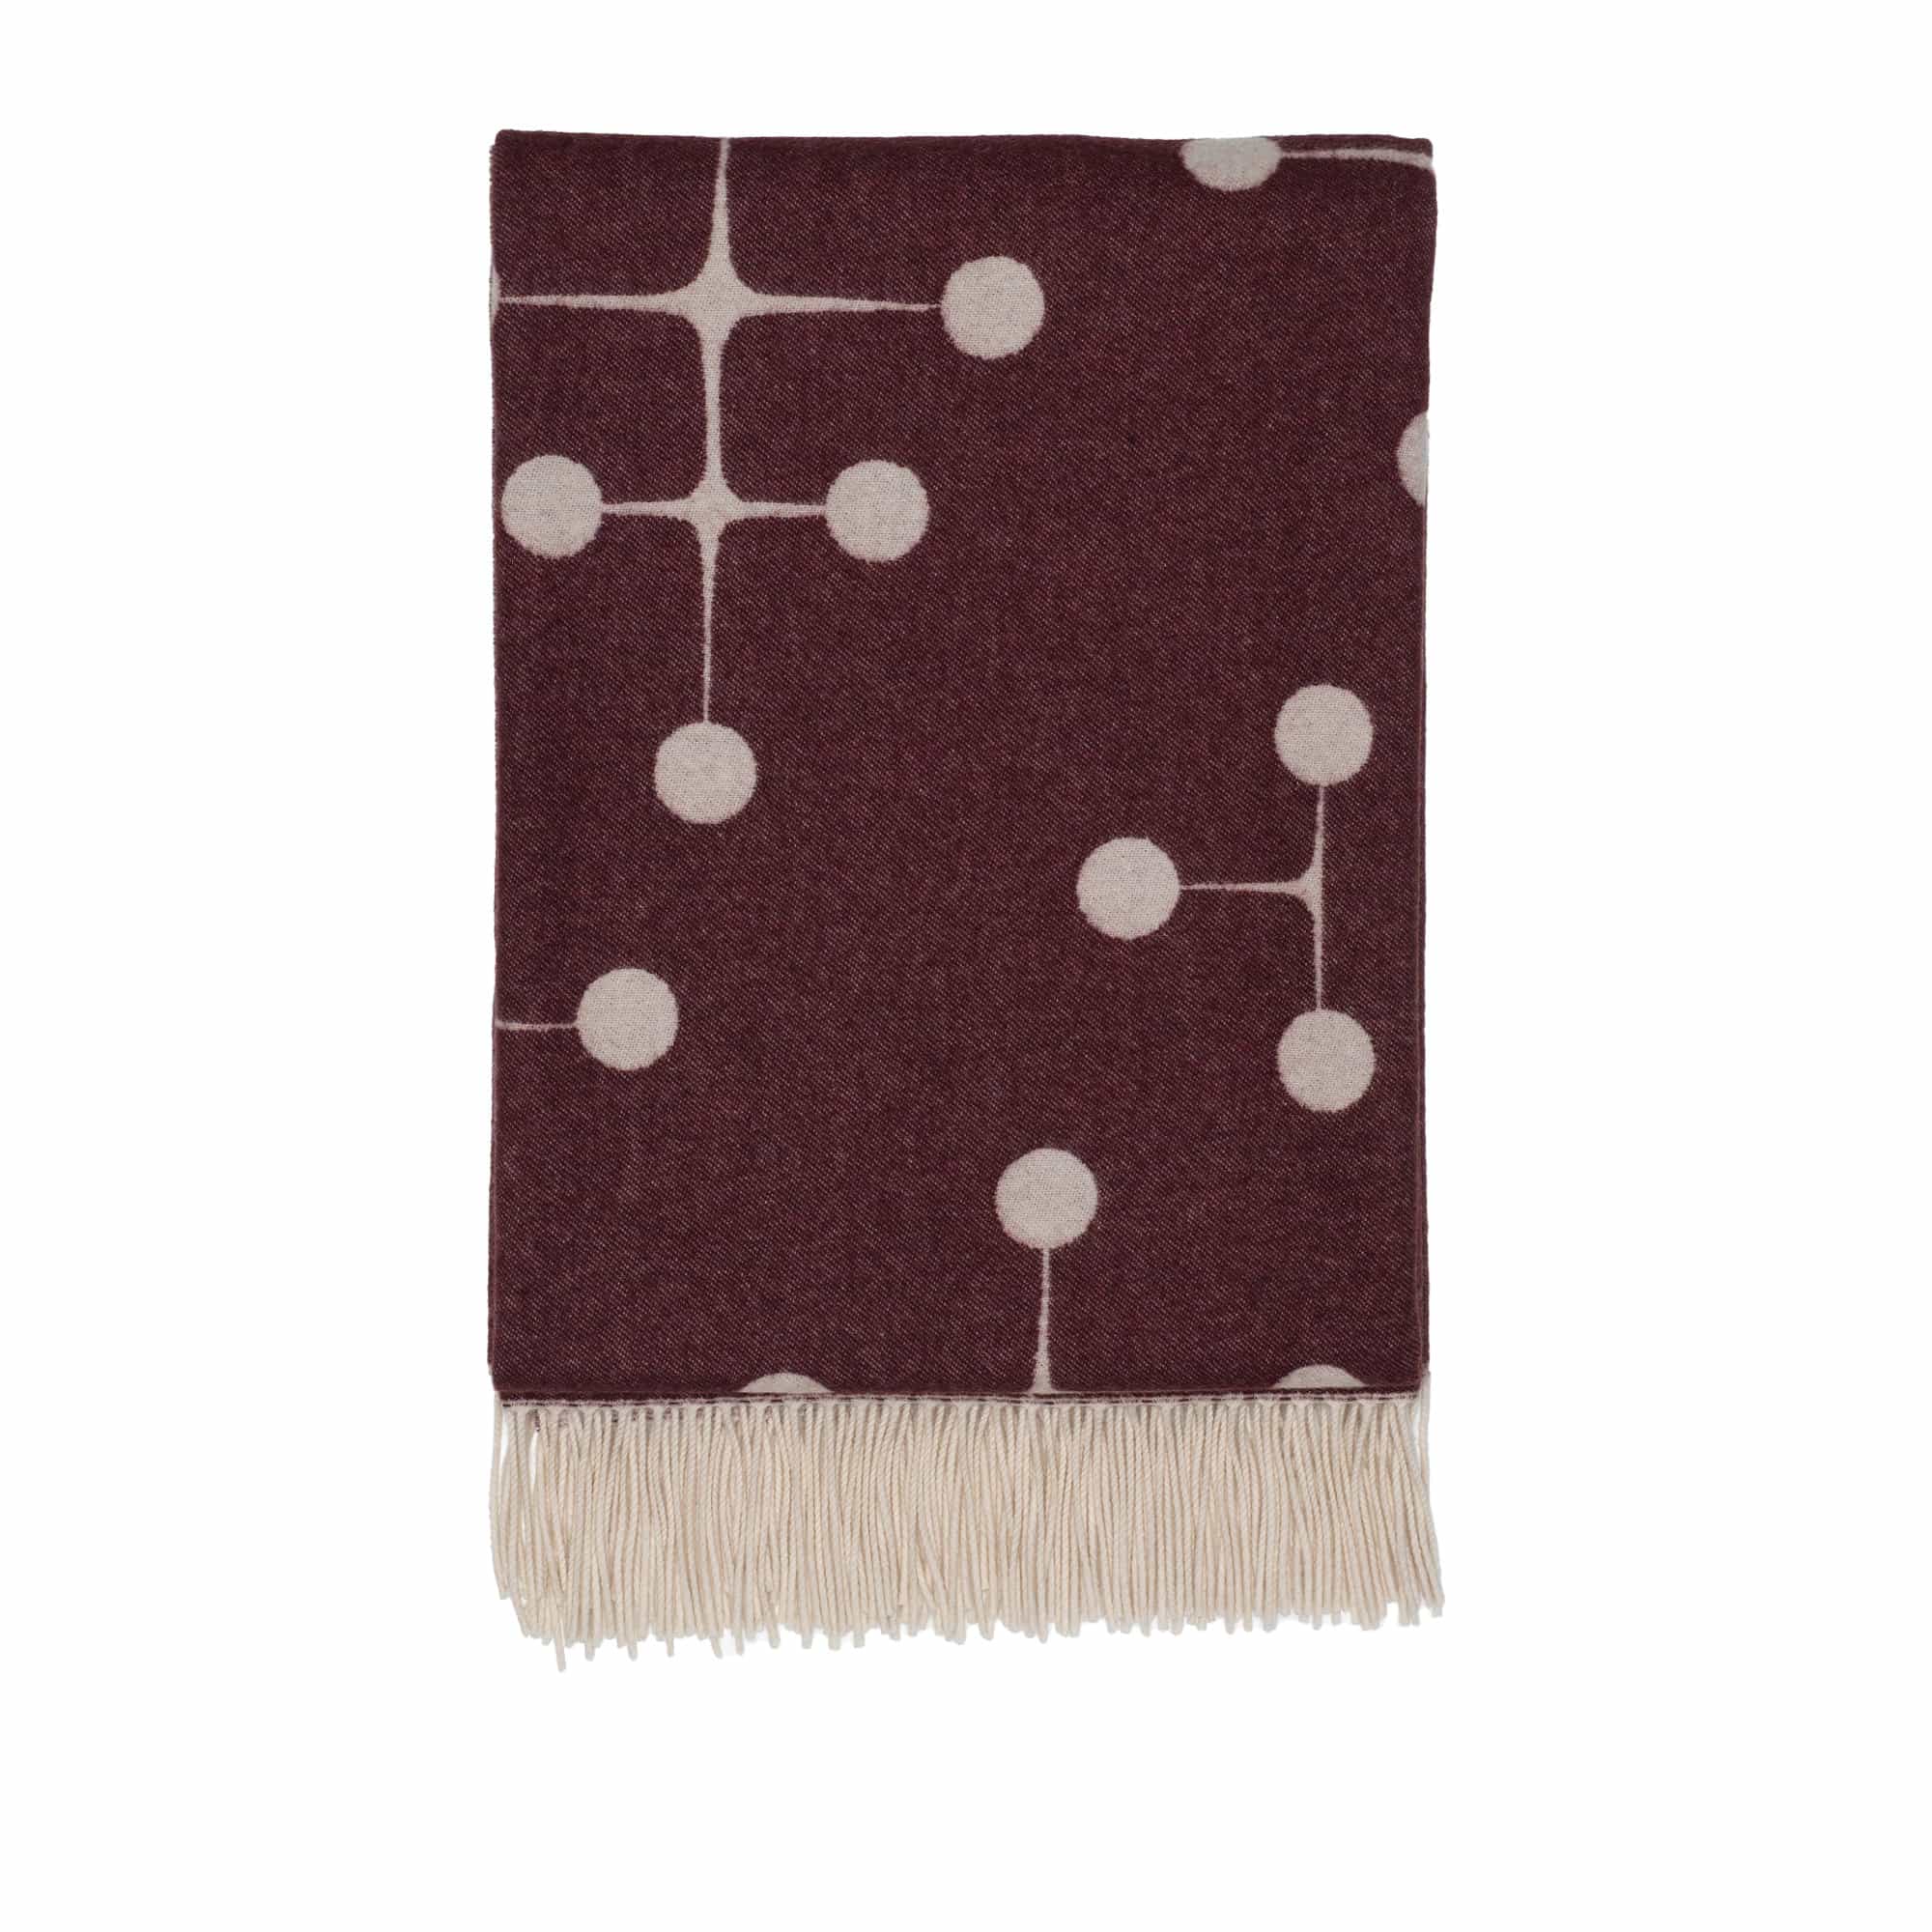 Eames Wool Blanket - Eames Special Collection